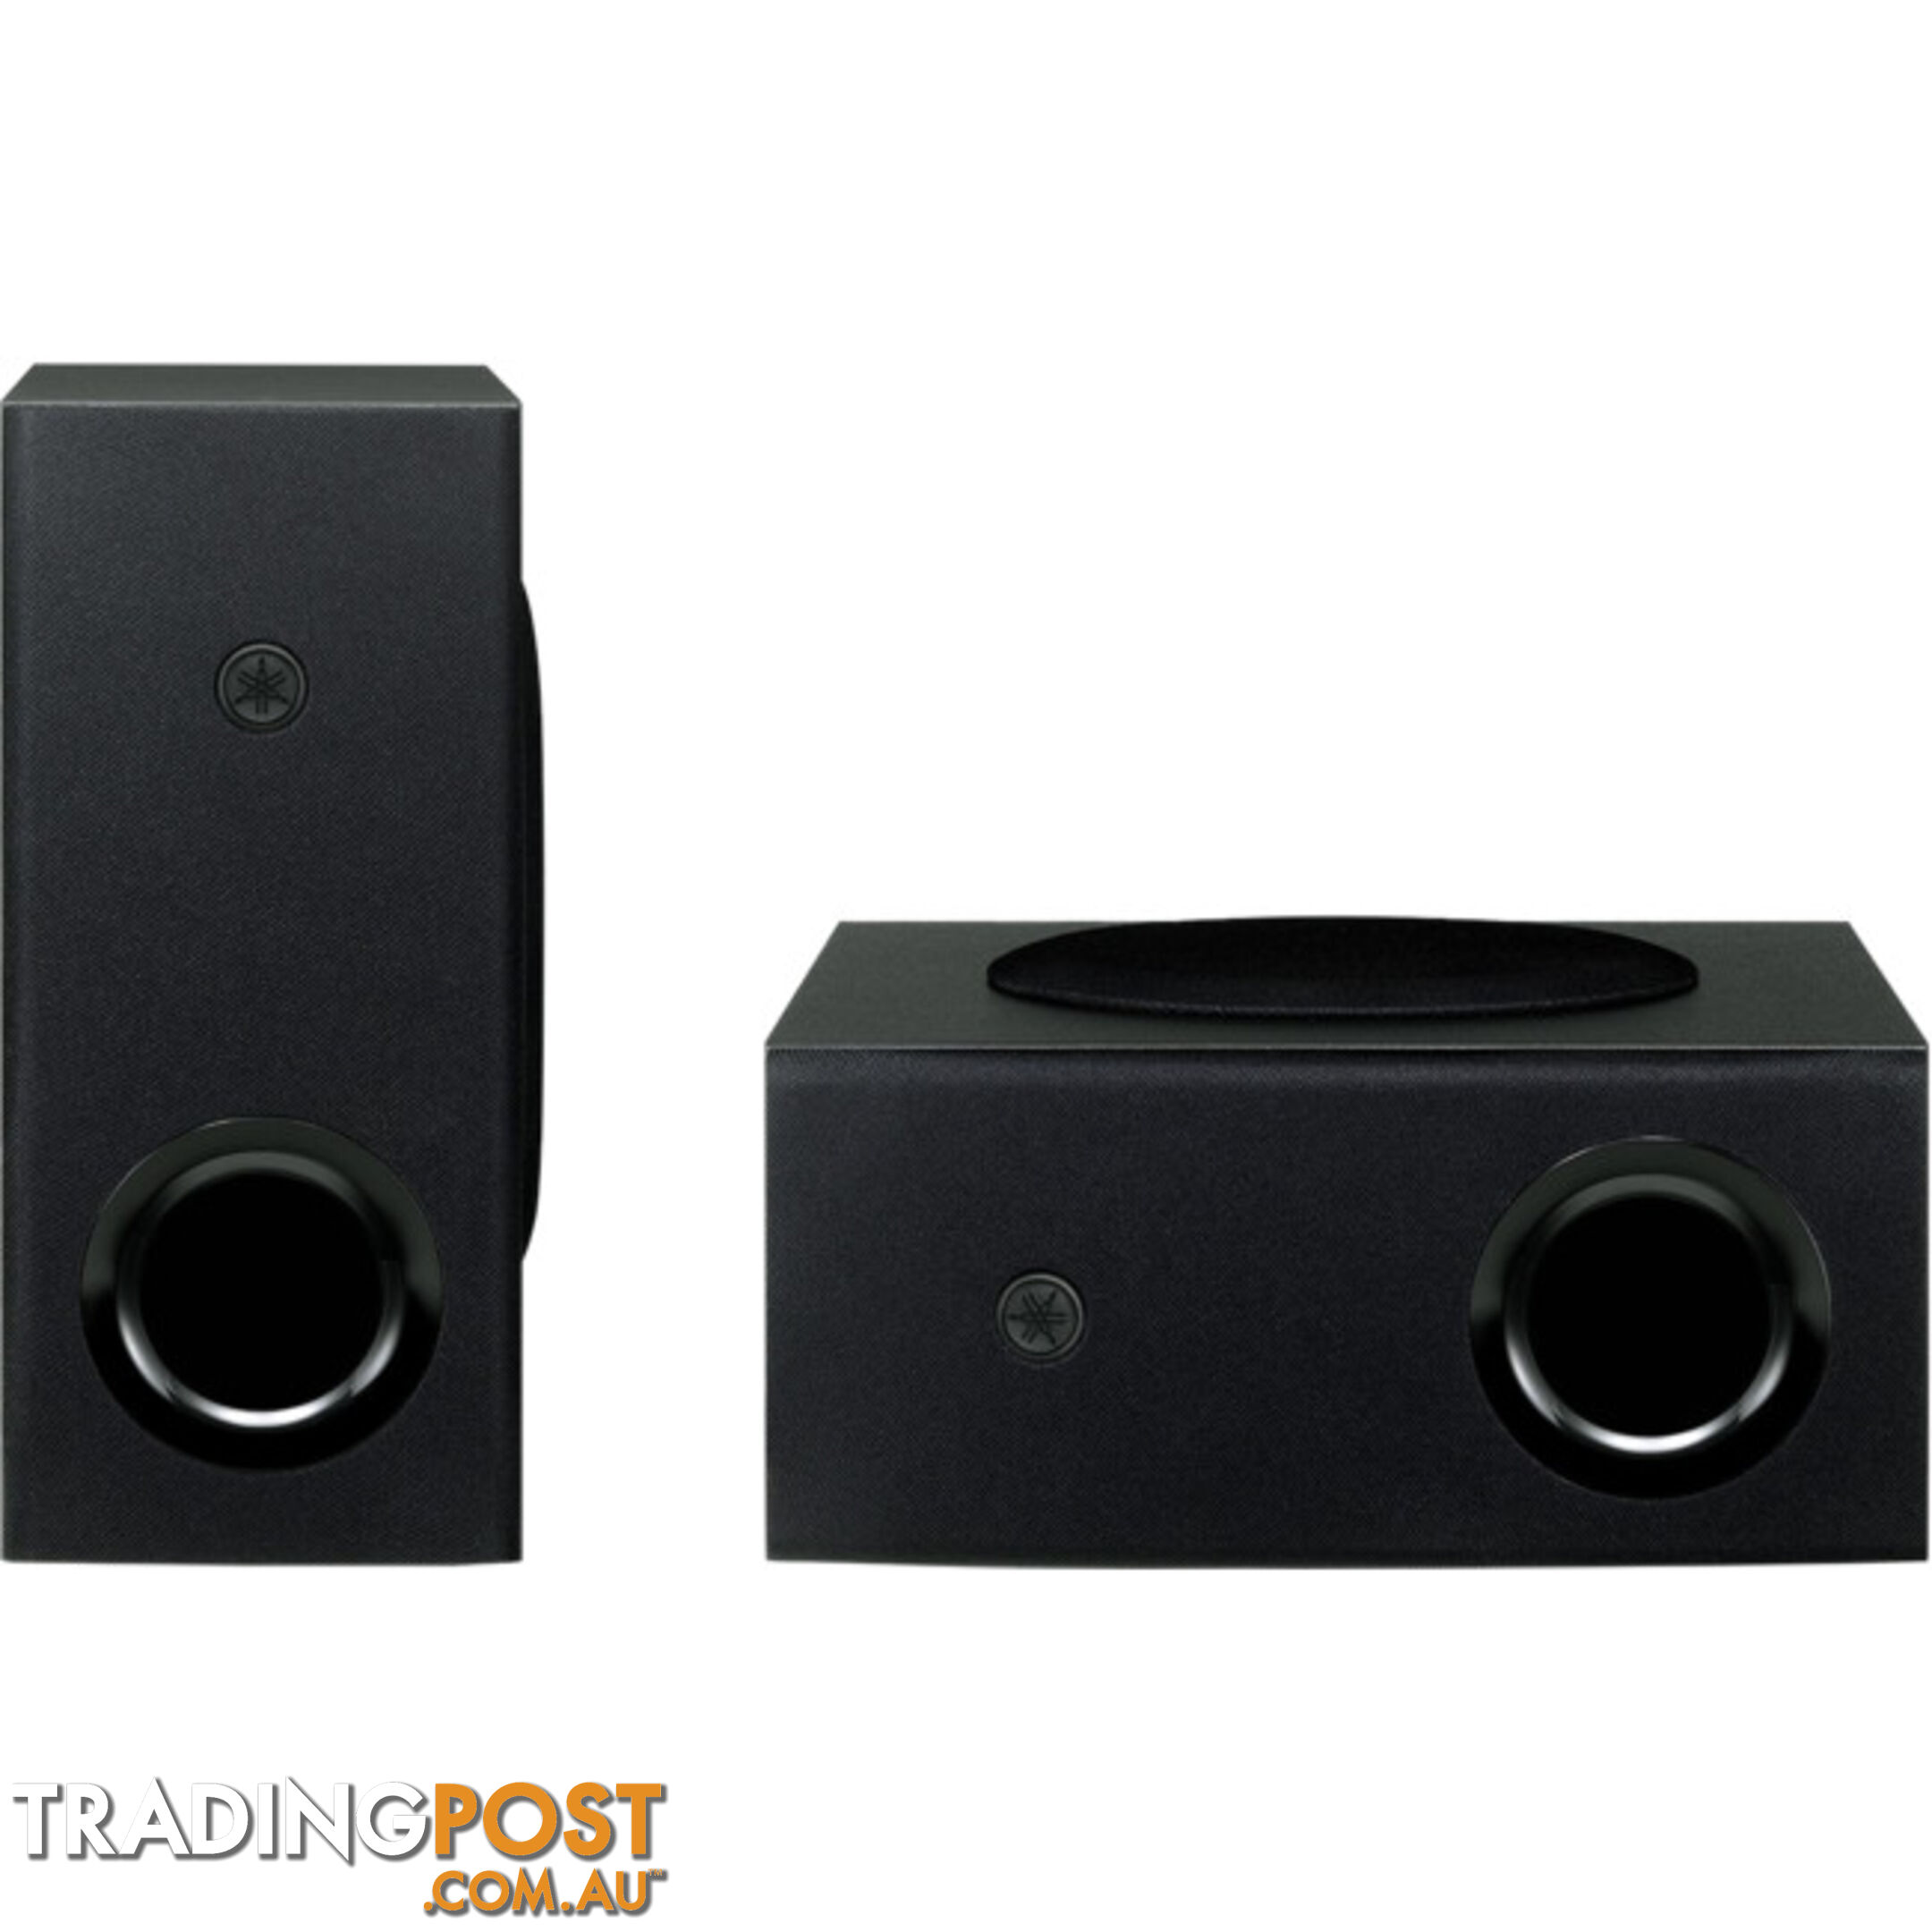 SRC30A COMPACT SOUND BAR AND WIRELESS SUBWOOFER